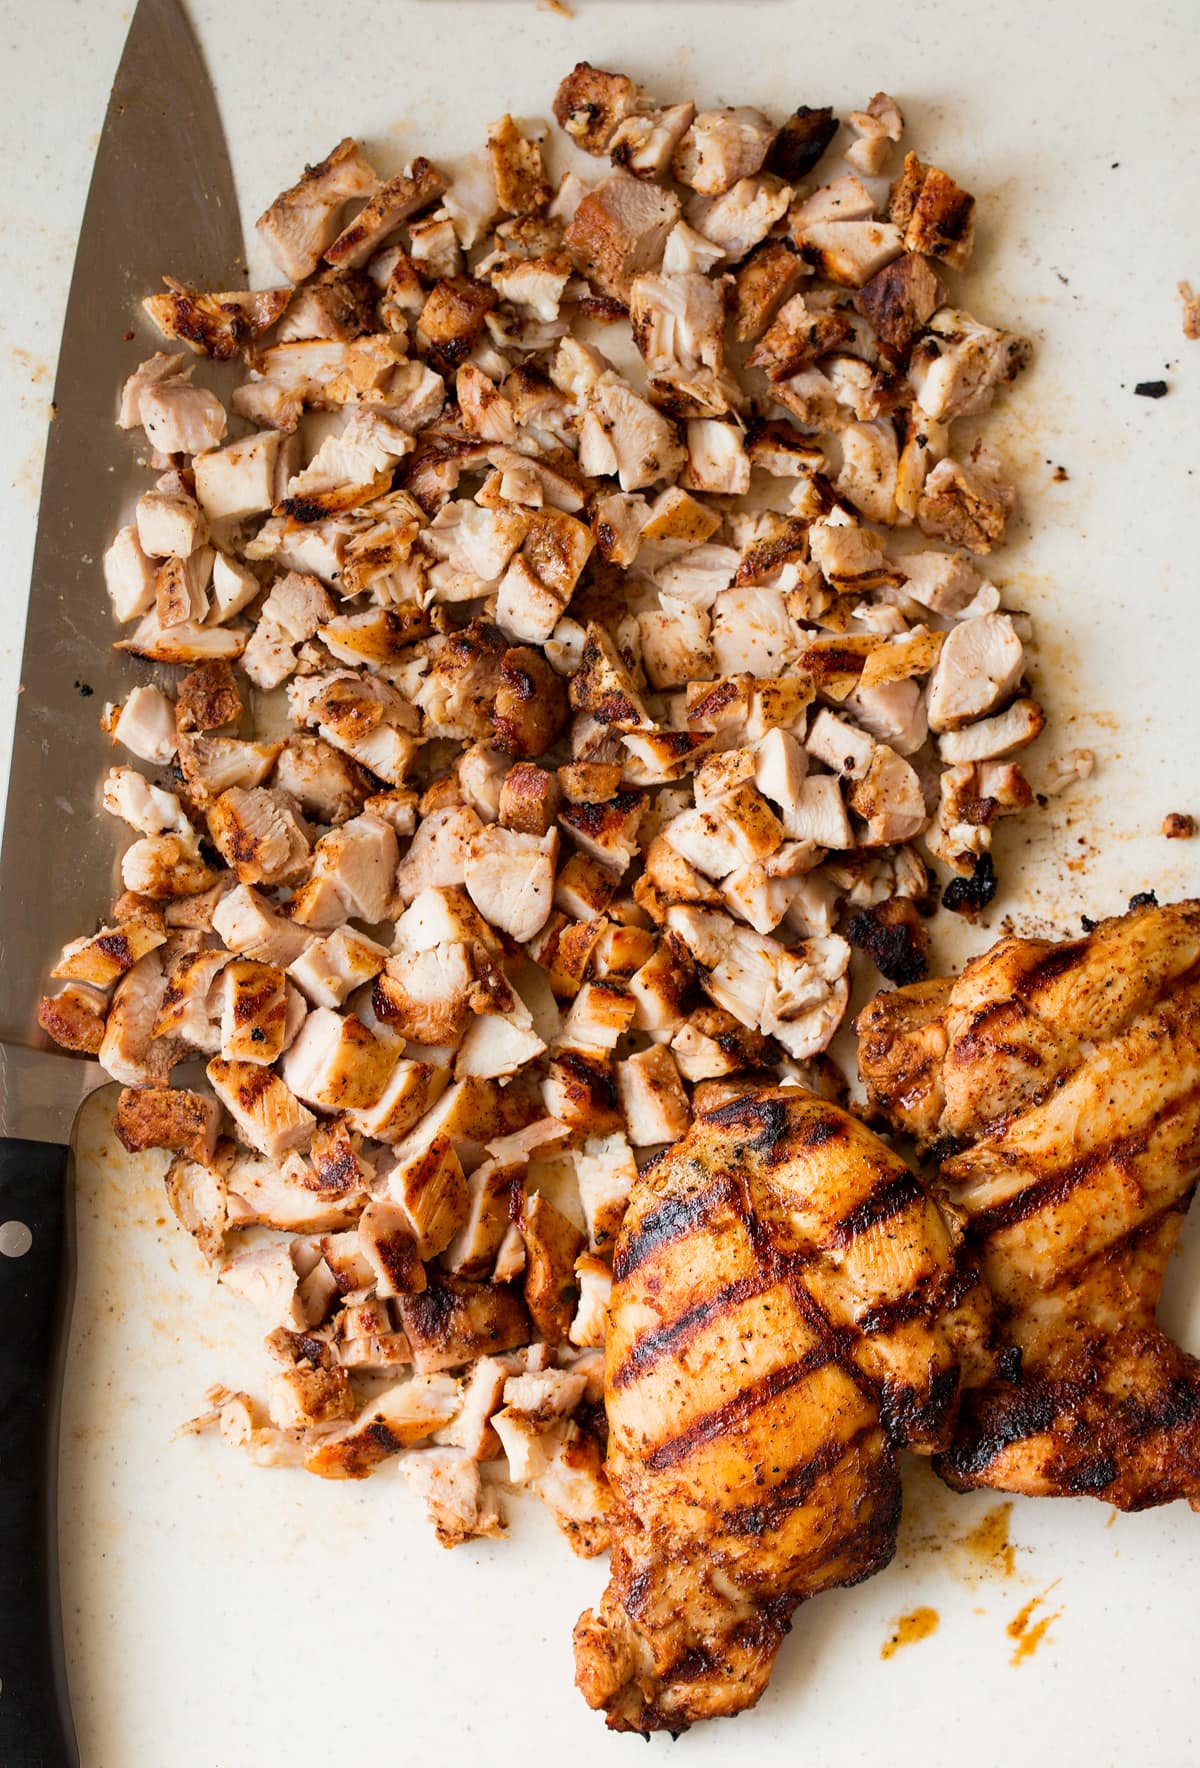 Chicken being diced on a cutting board into small pieces to serve in tacos.